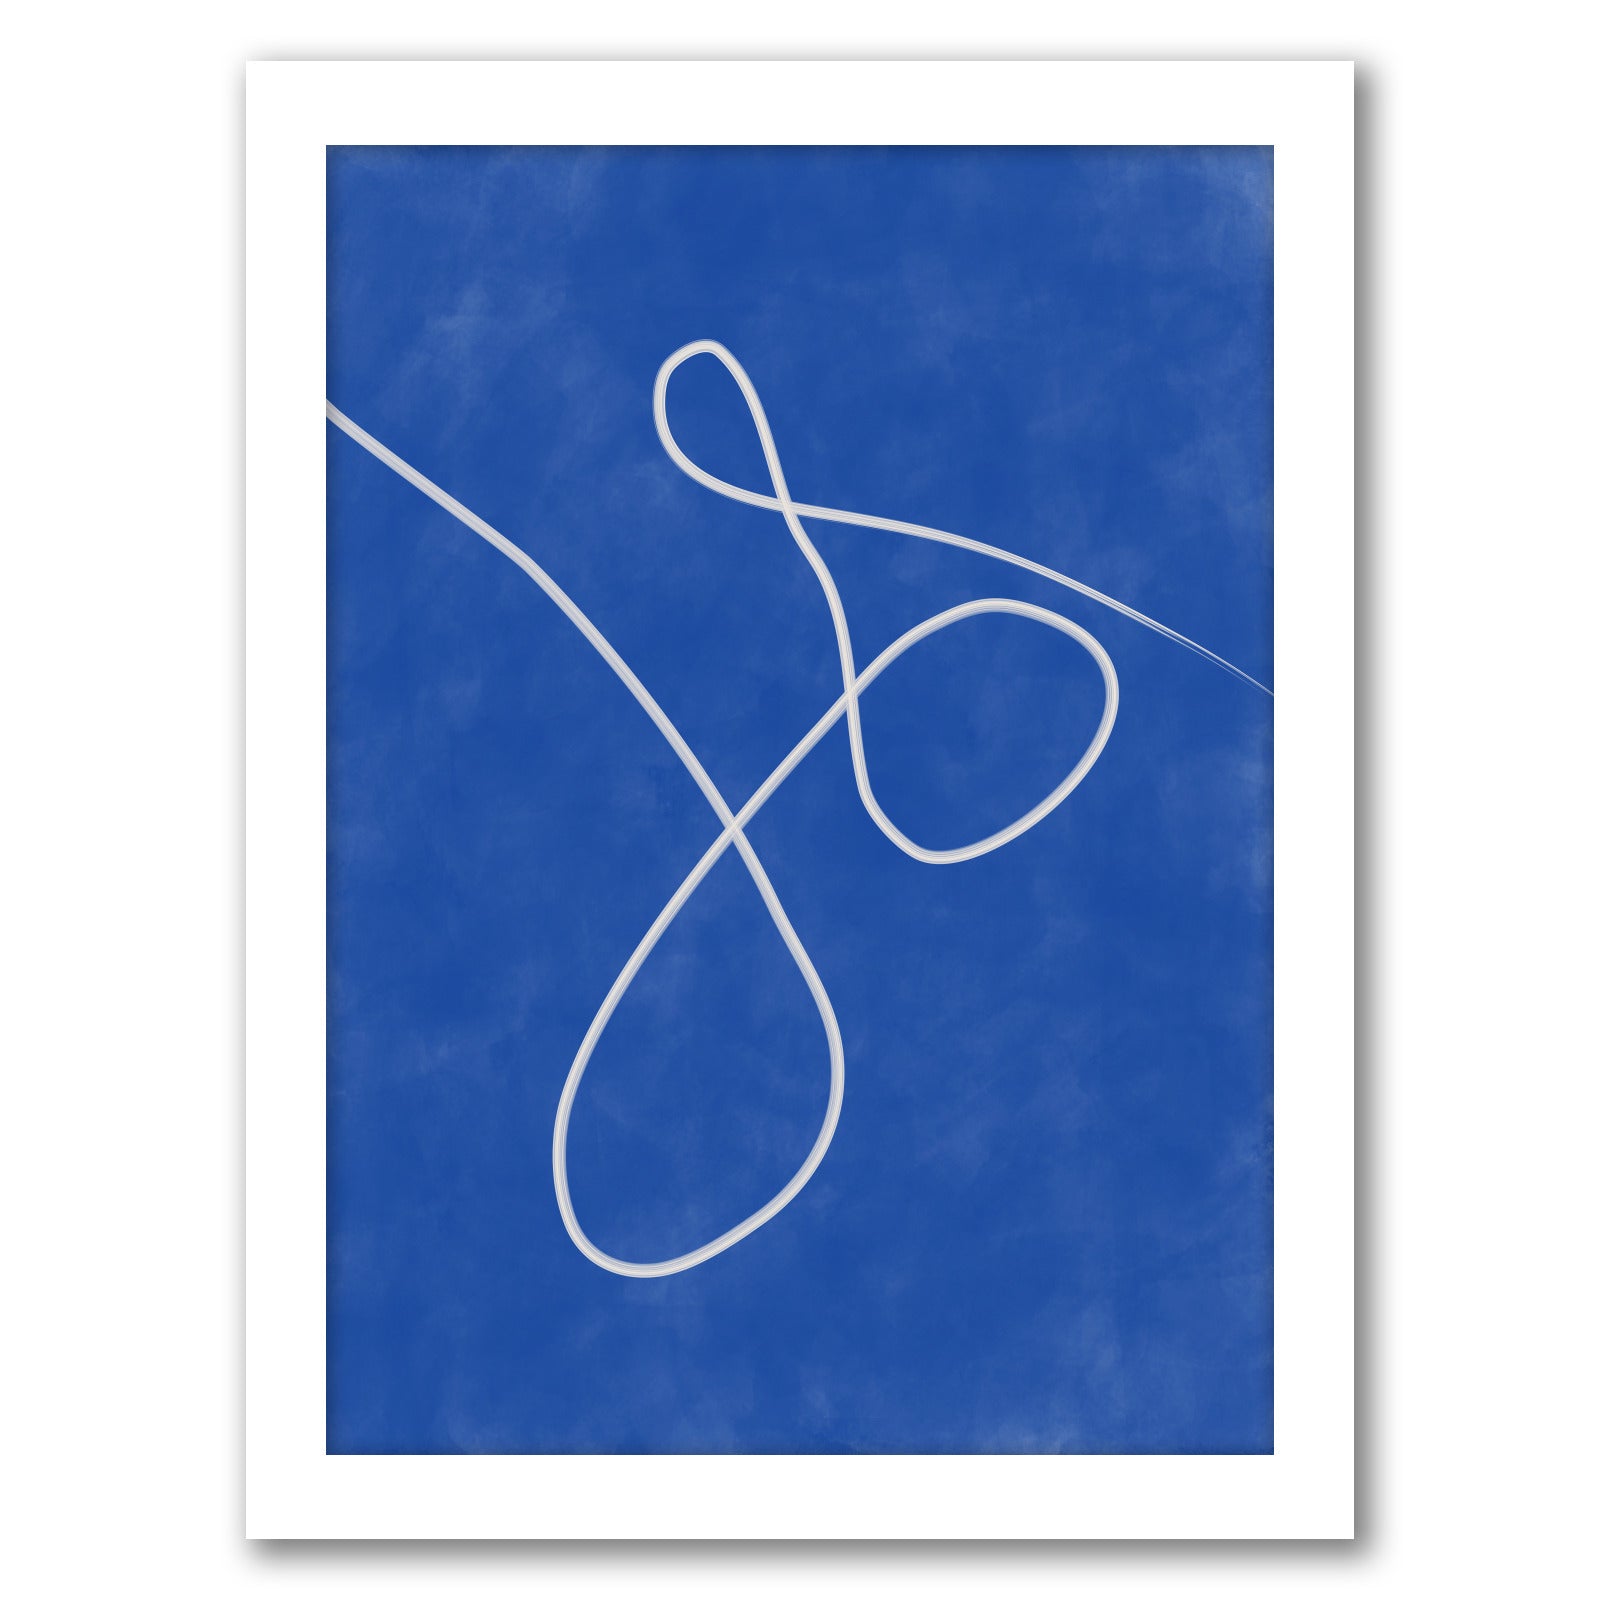 Cobalt Blue Beige Continuous Line Drawing 2 by The Print Republic - Canvas, Poster or Framed Print